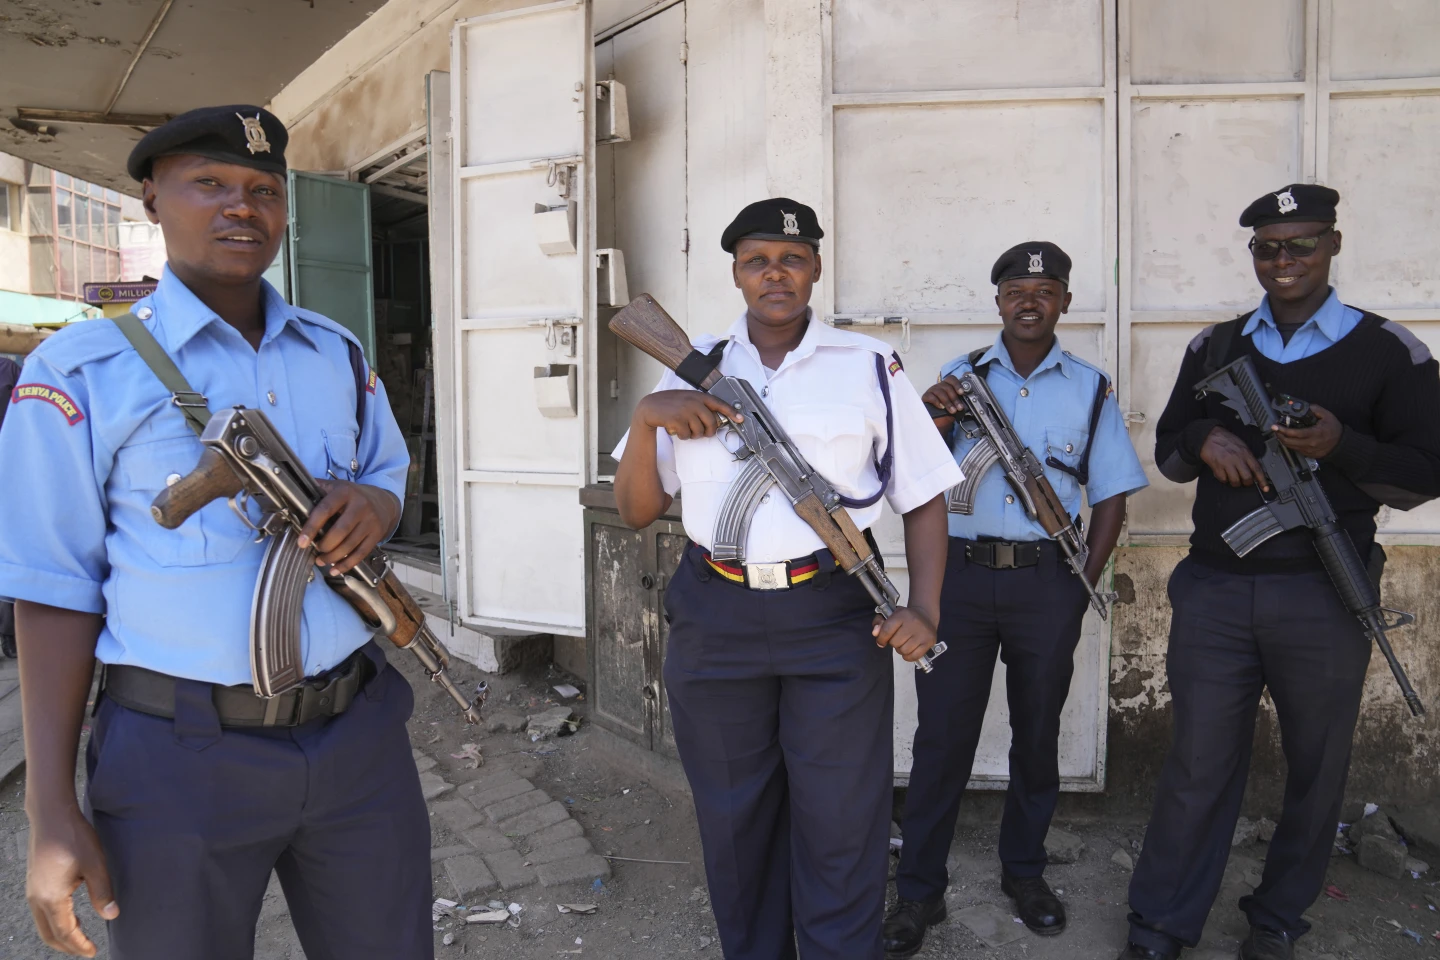 Kenya halts deployment of police to Haiti in the absence of legal authority in the Caribbean nation